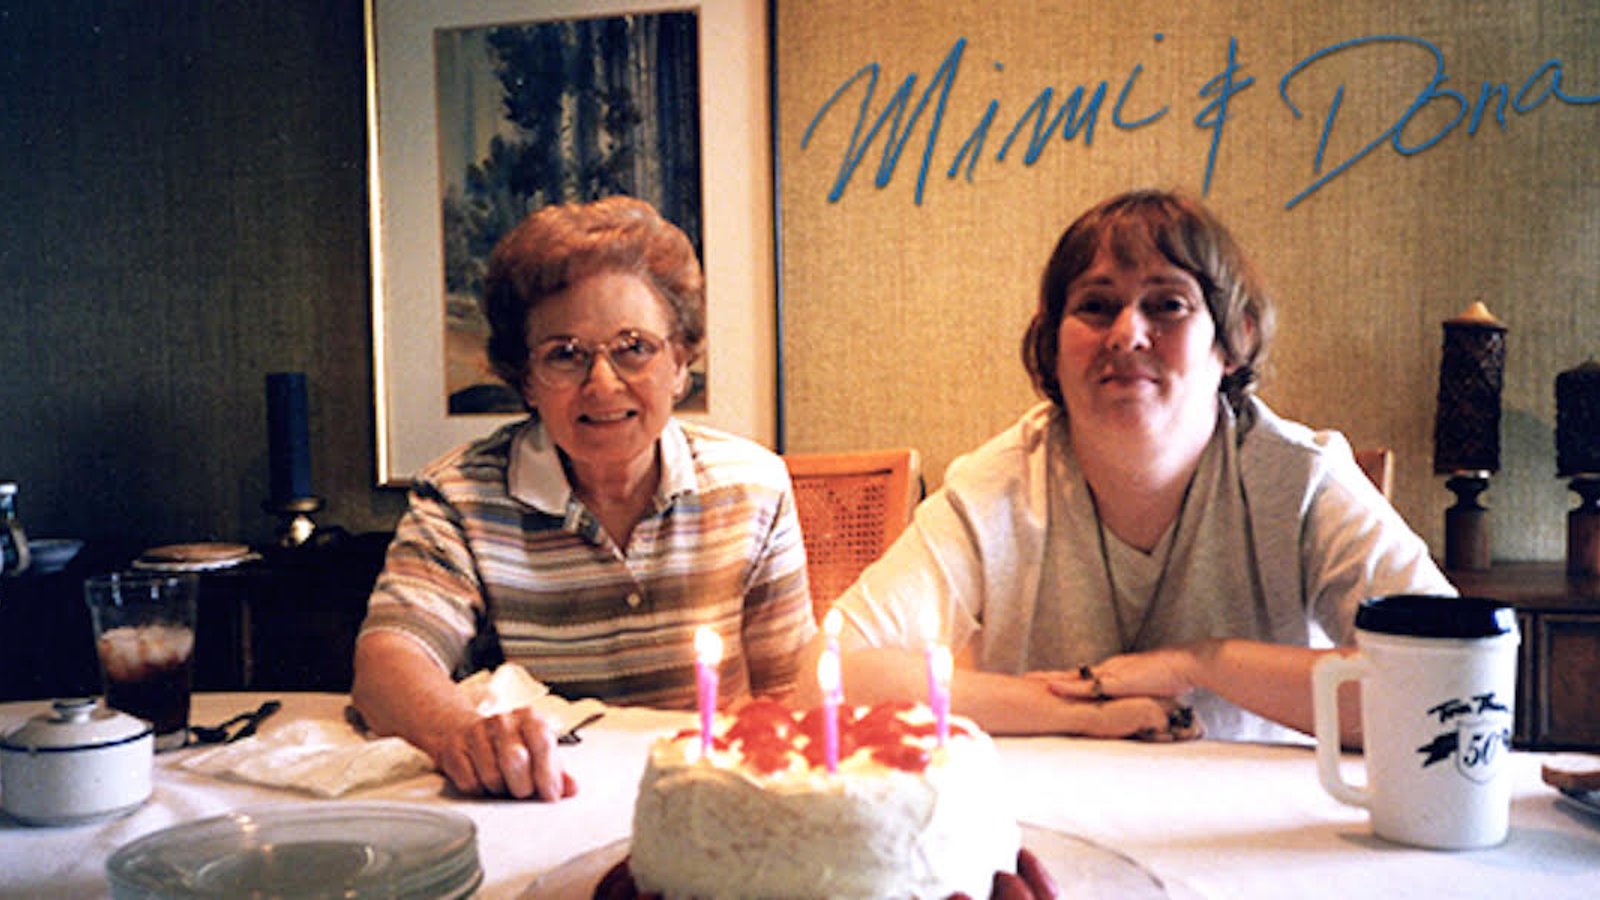 Mimi and Dona - An Aging Mother Cares for her Disabled Daughter